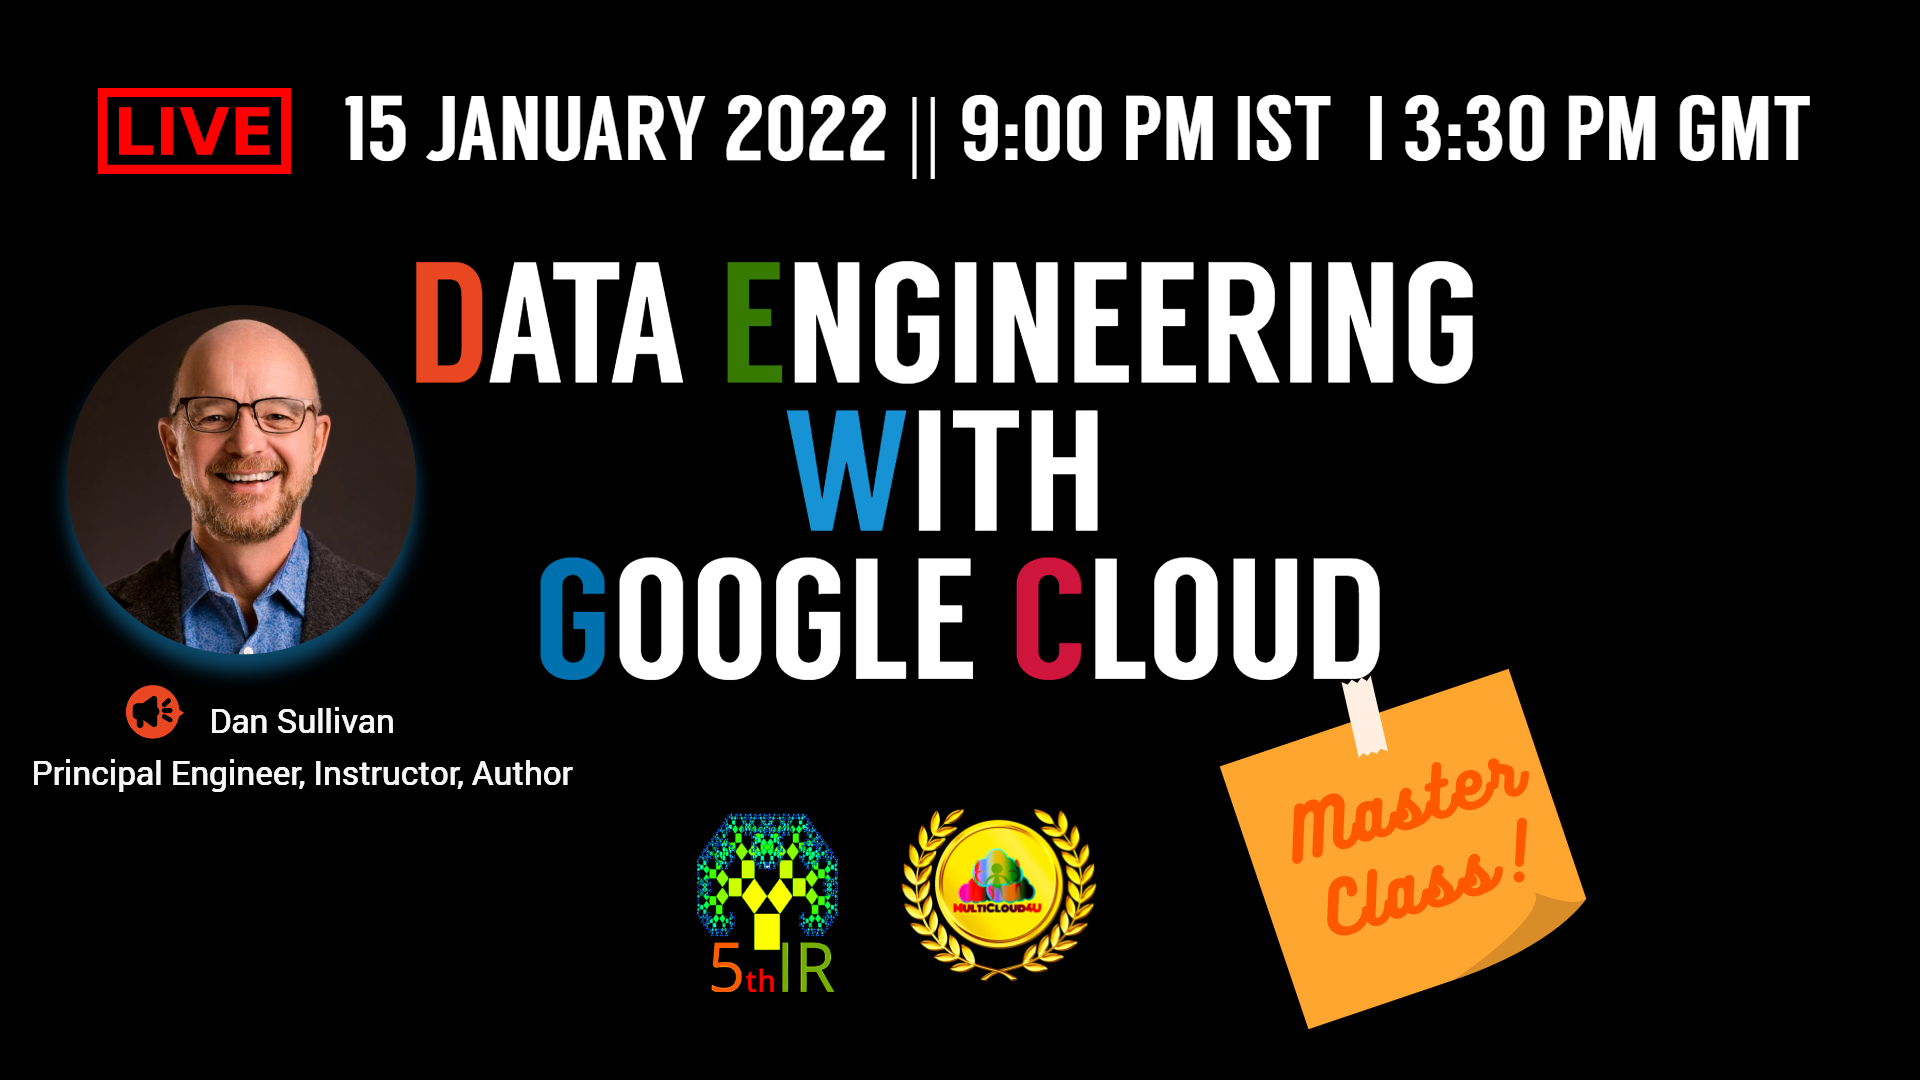 A Master Class on Data engineering with google cloud